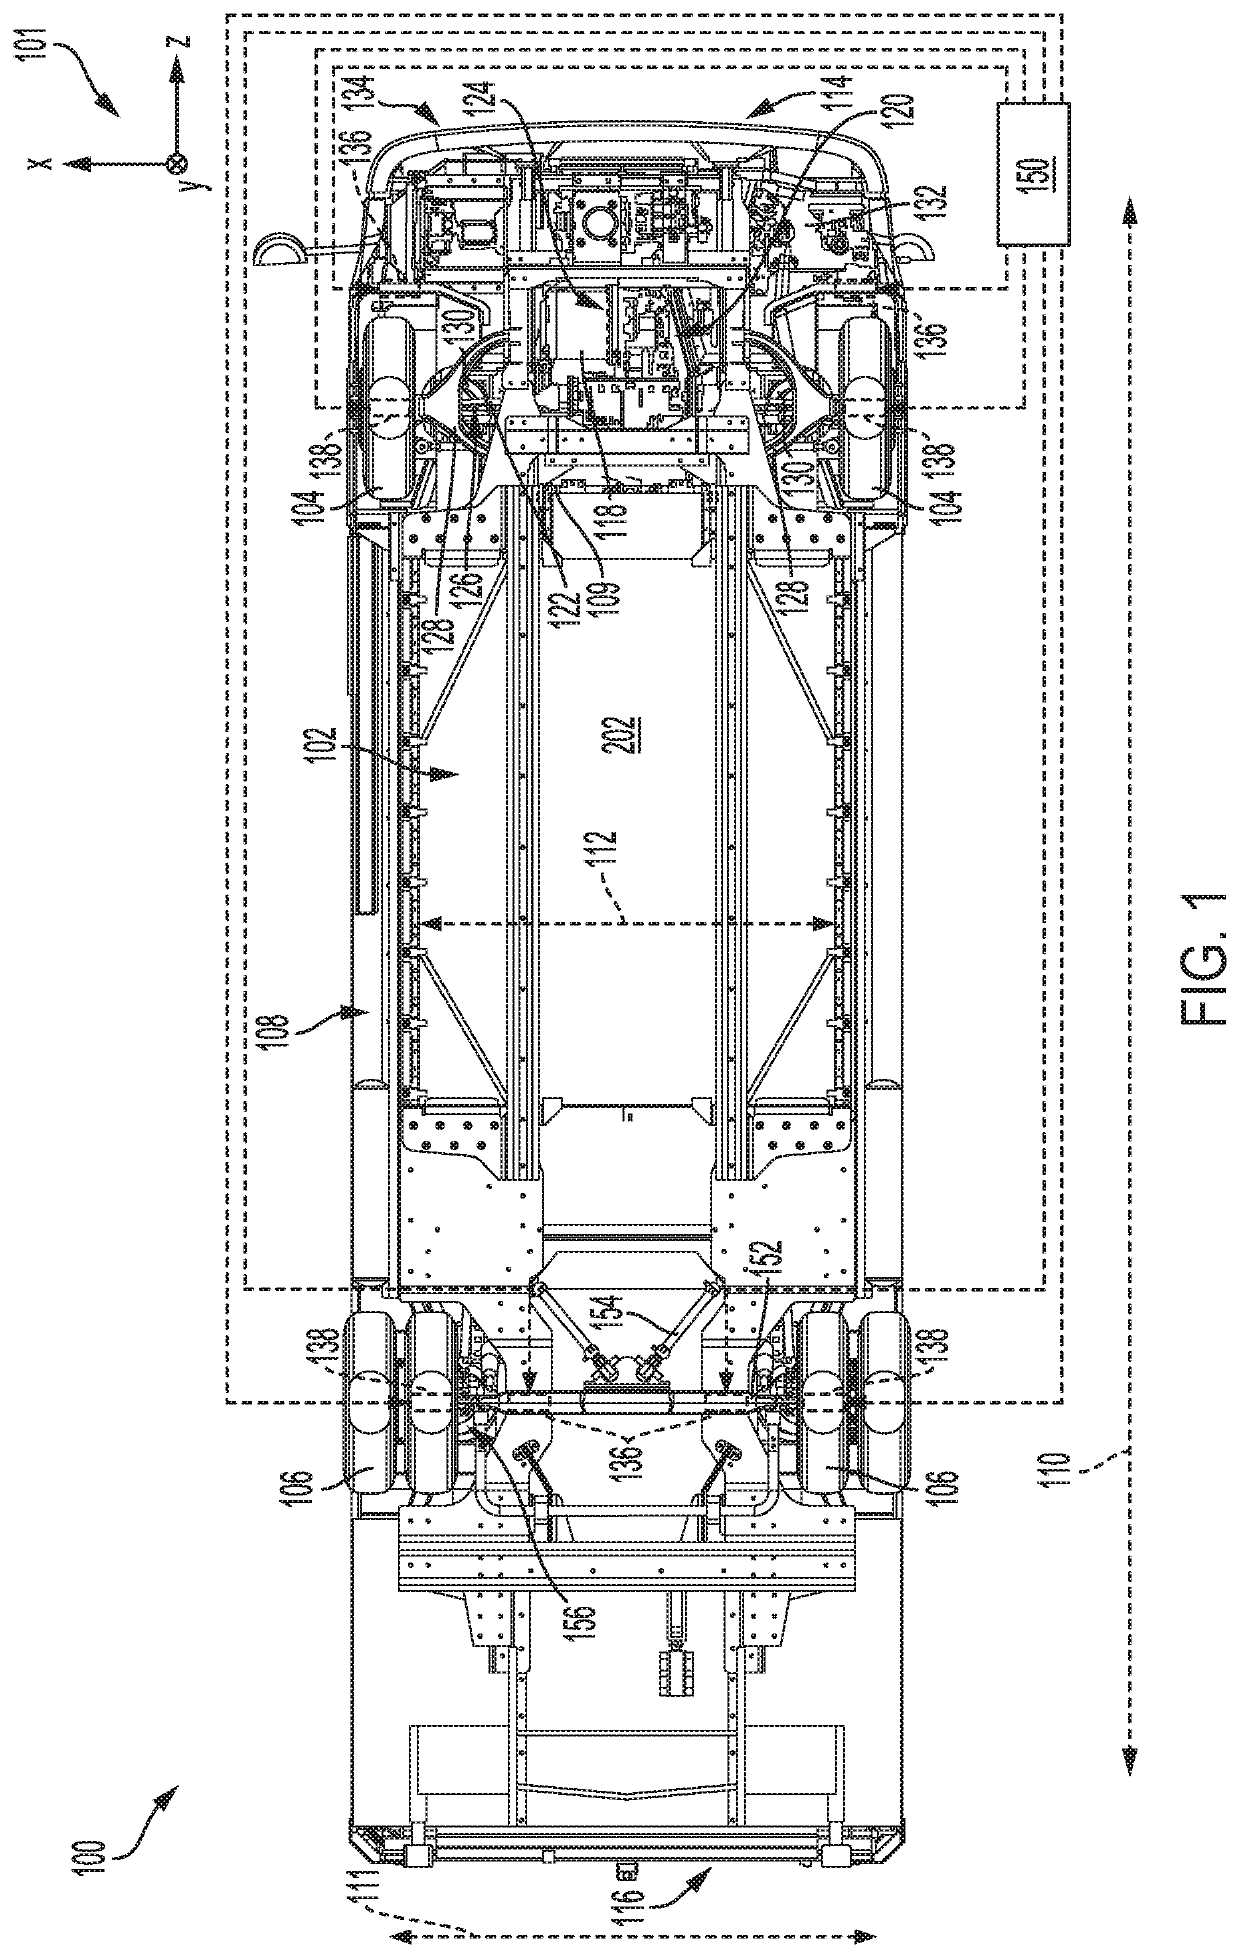 Suspension system for electric heavy-duty vehicle